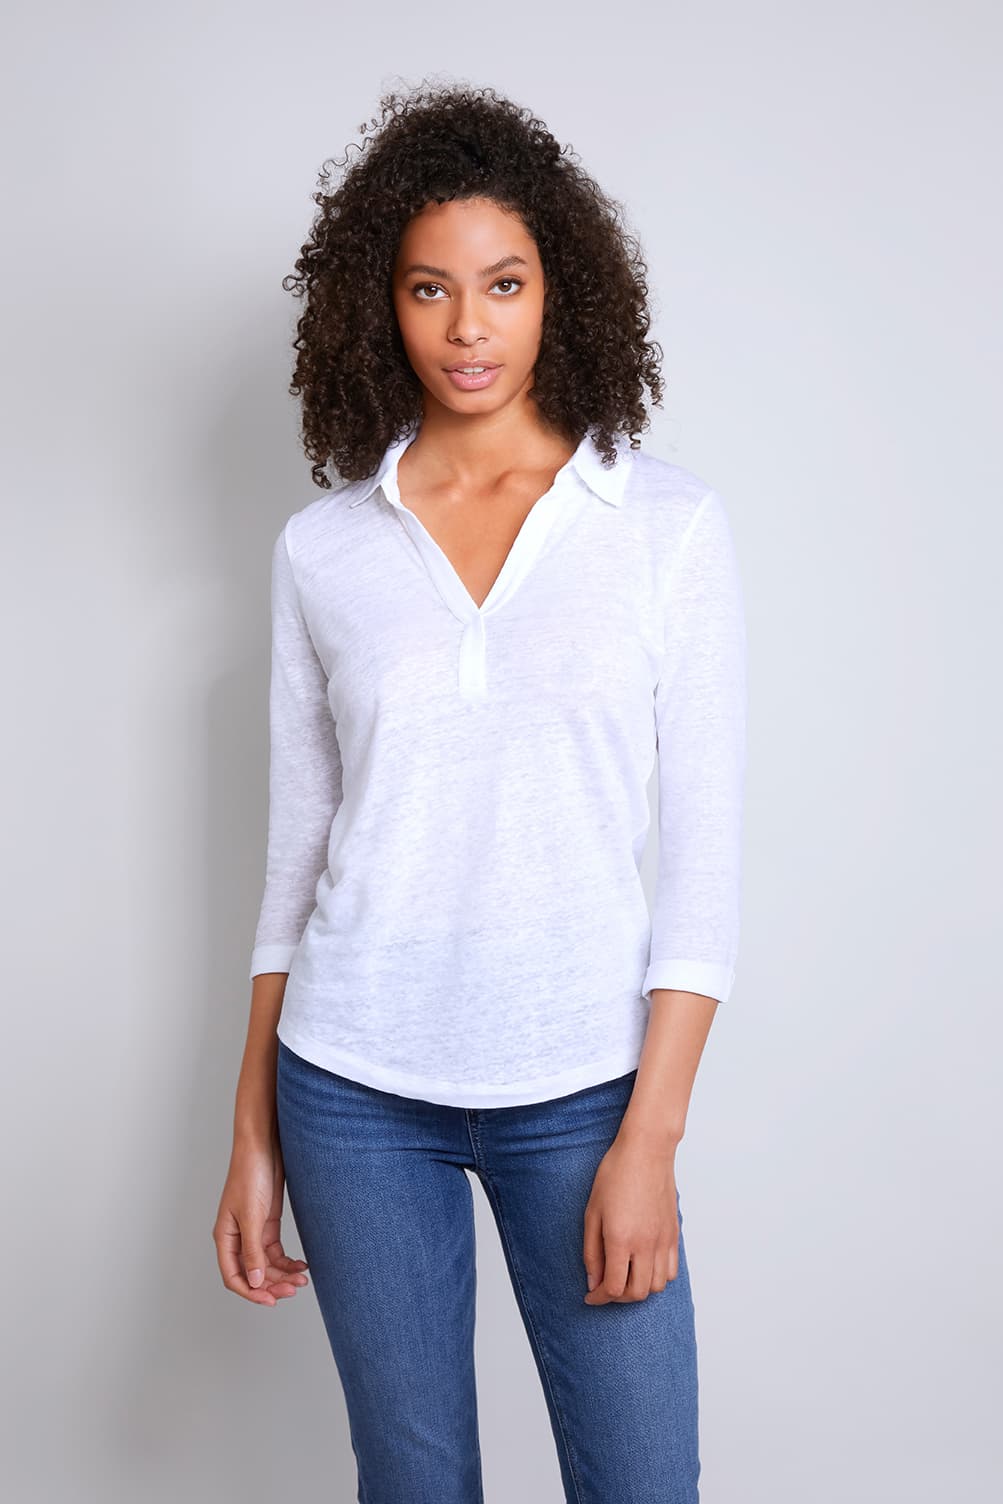 Womens white Collared Linen 3/4 sleeve T-shirt by Lavender Hill Clothing